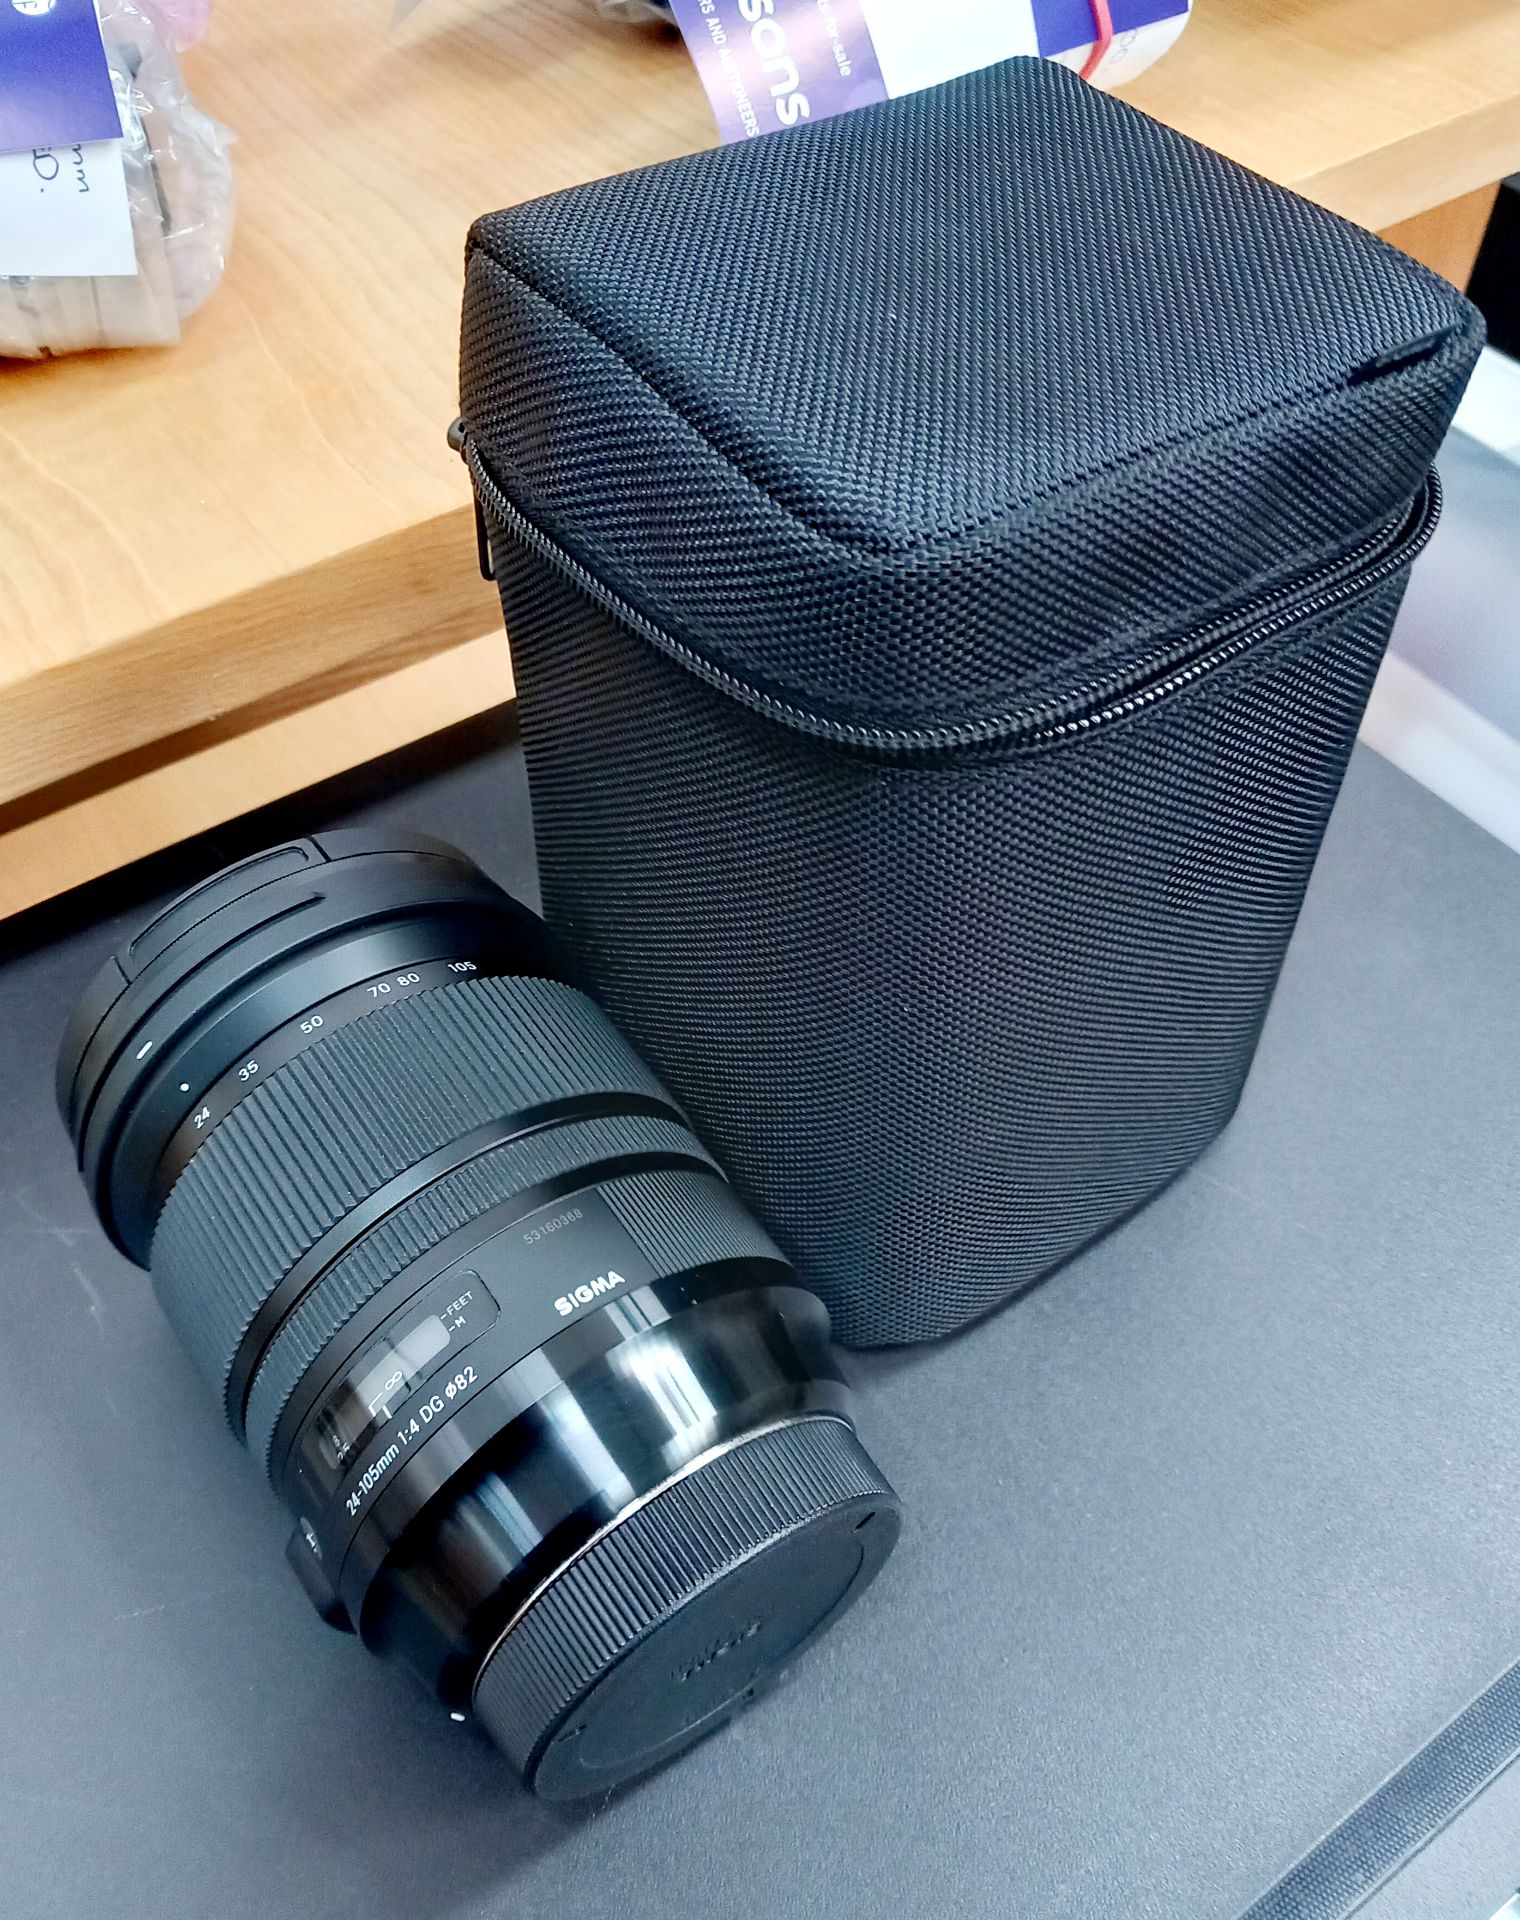 Sigma 24-105mm F4 D9, Canon fit